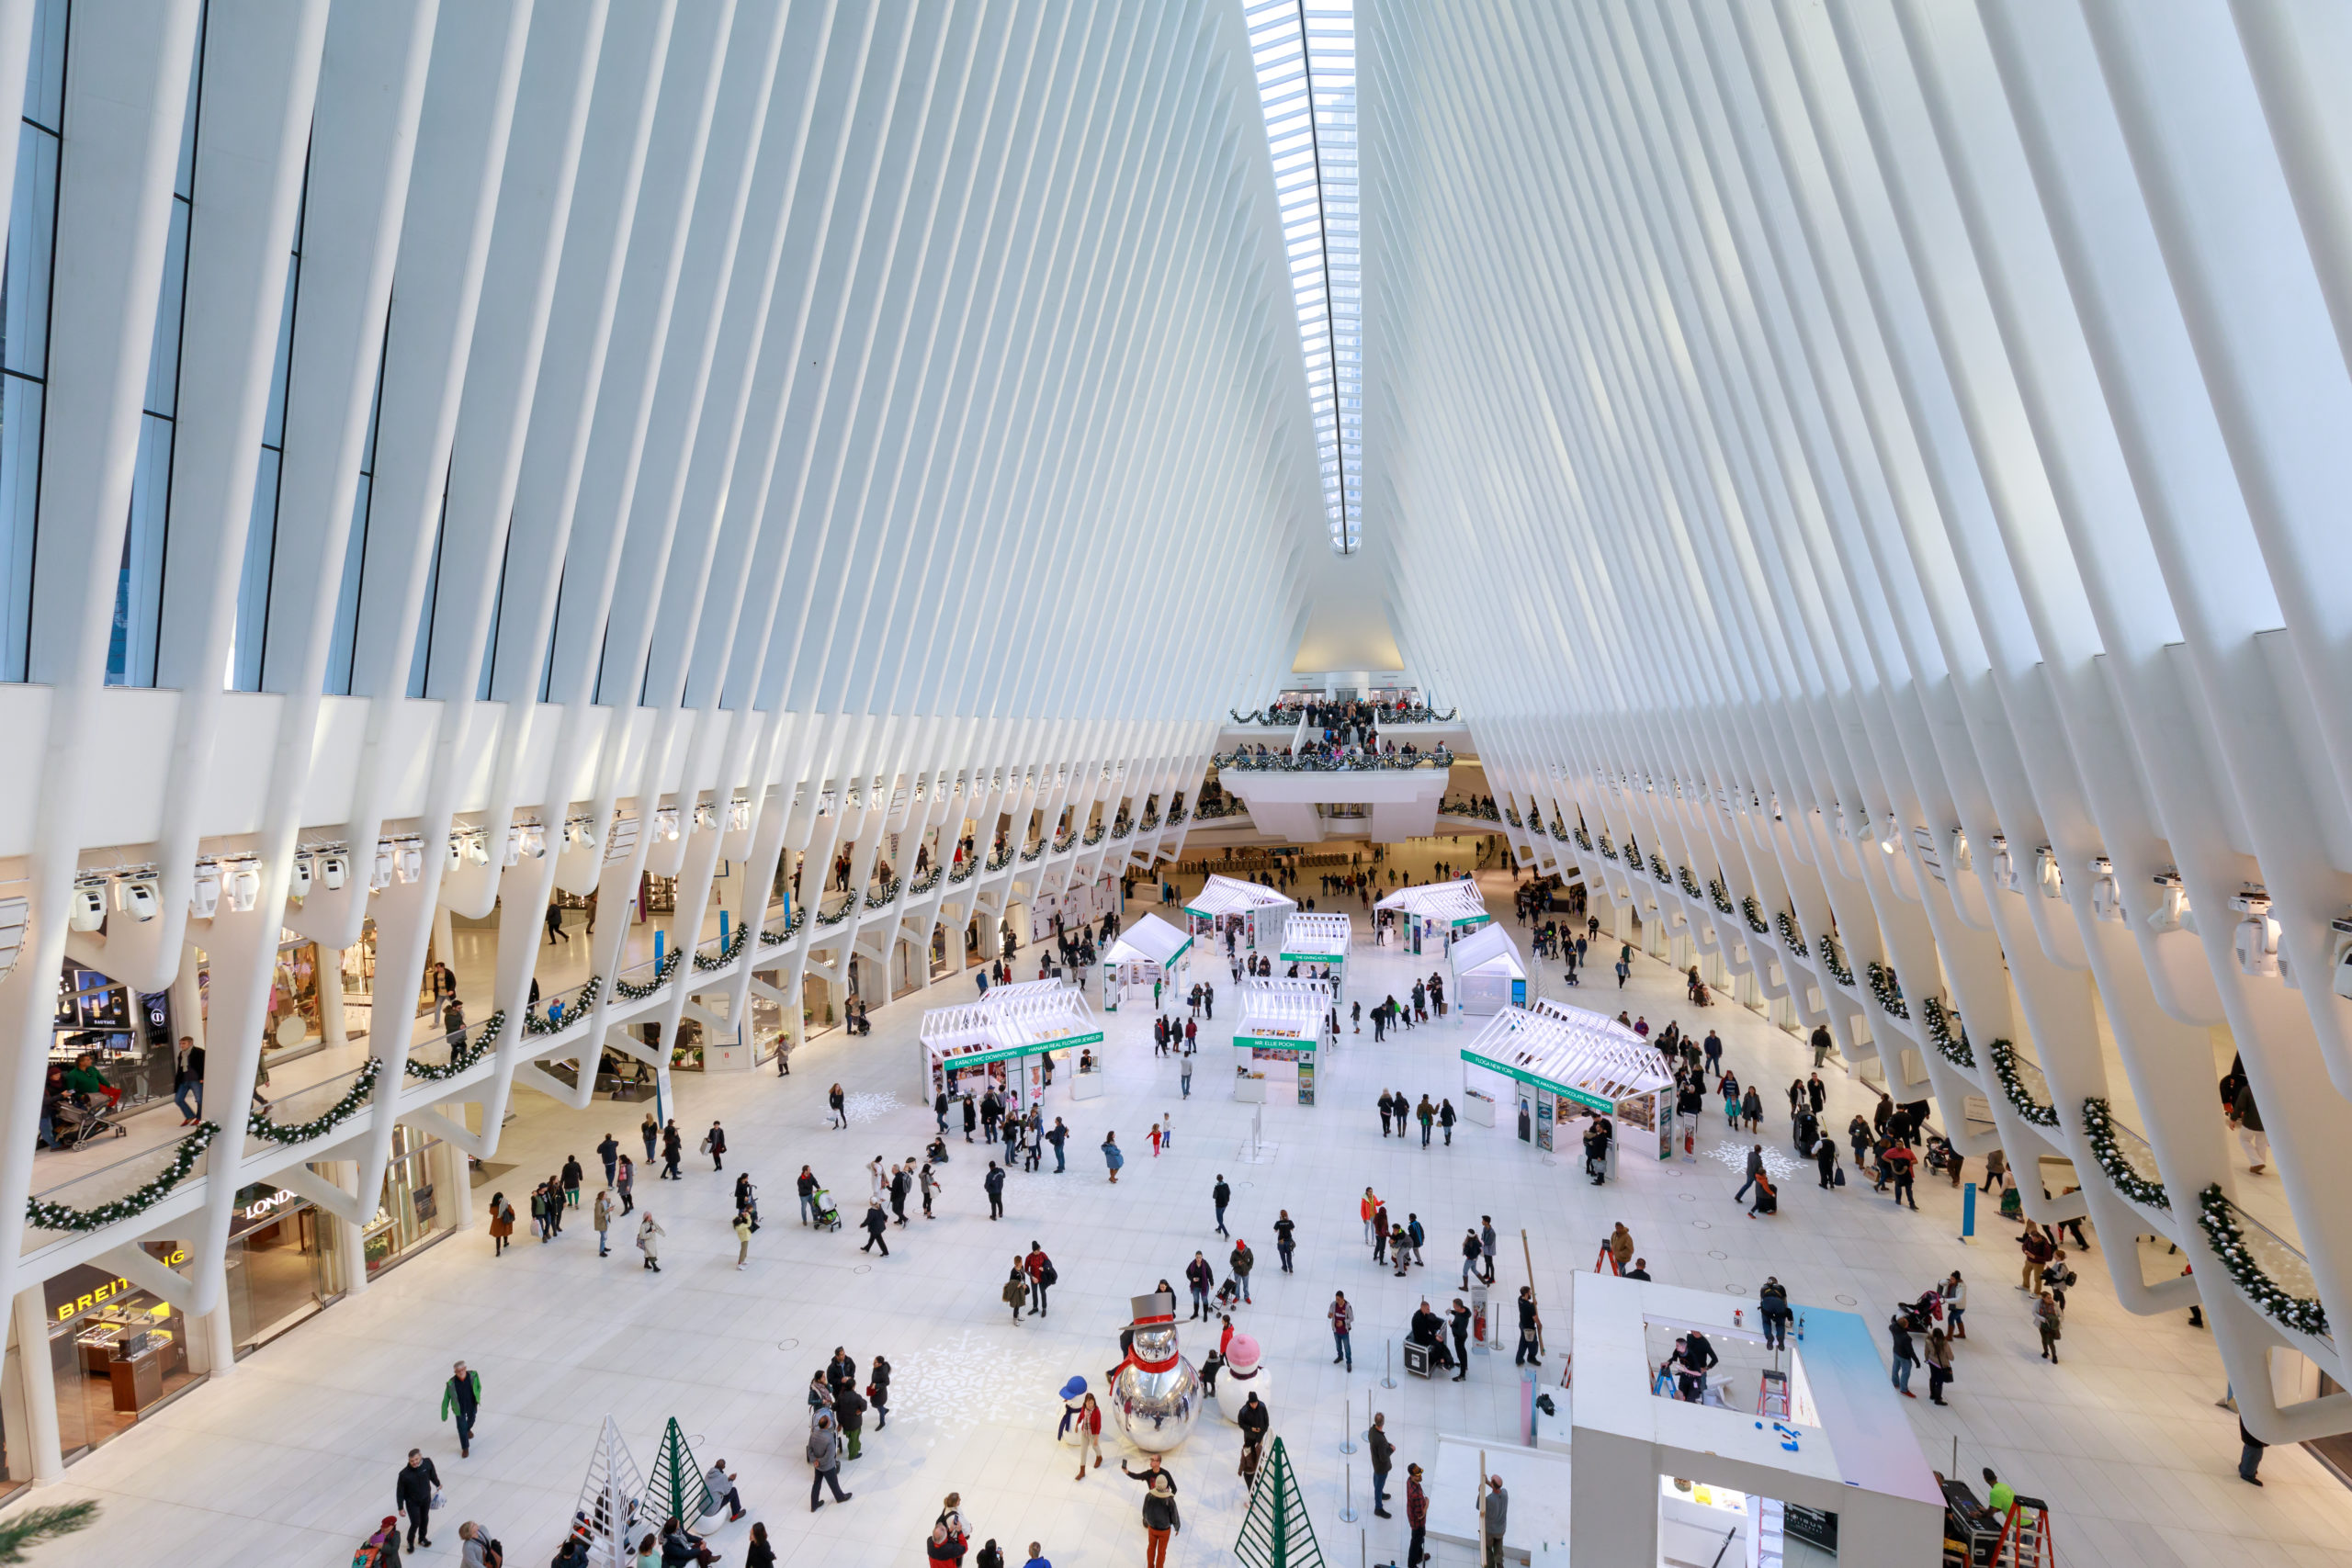 Remarkable NYC Architecture: The Oculus, Interior of the white World Trade Center station in Lower Manhattan